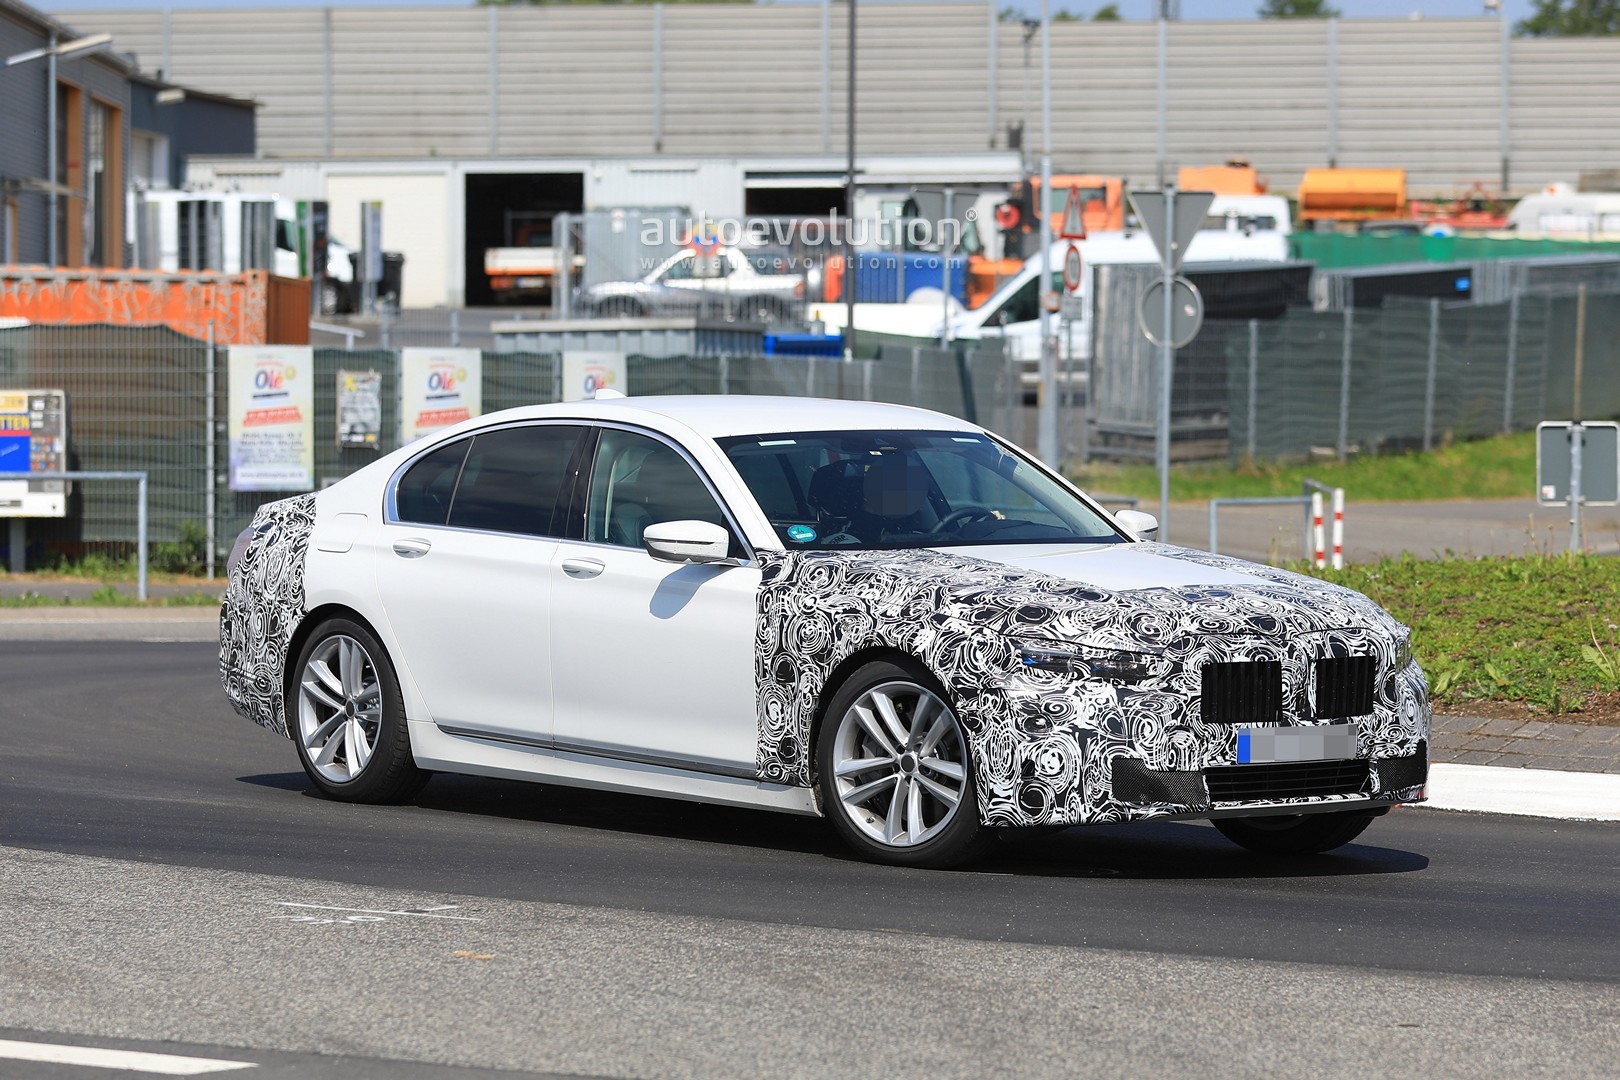 2020 BMW 7 Series Facelift Gets quot;Pig Nosequot; Face Thanks to X7
Grille Infusion autoevolution